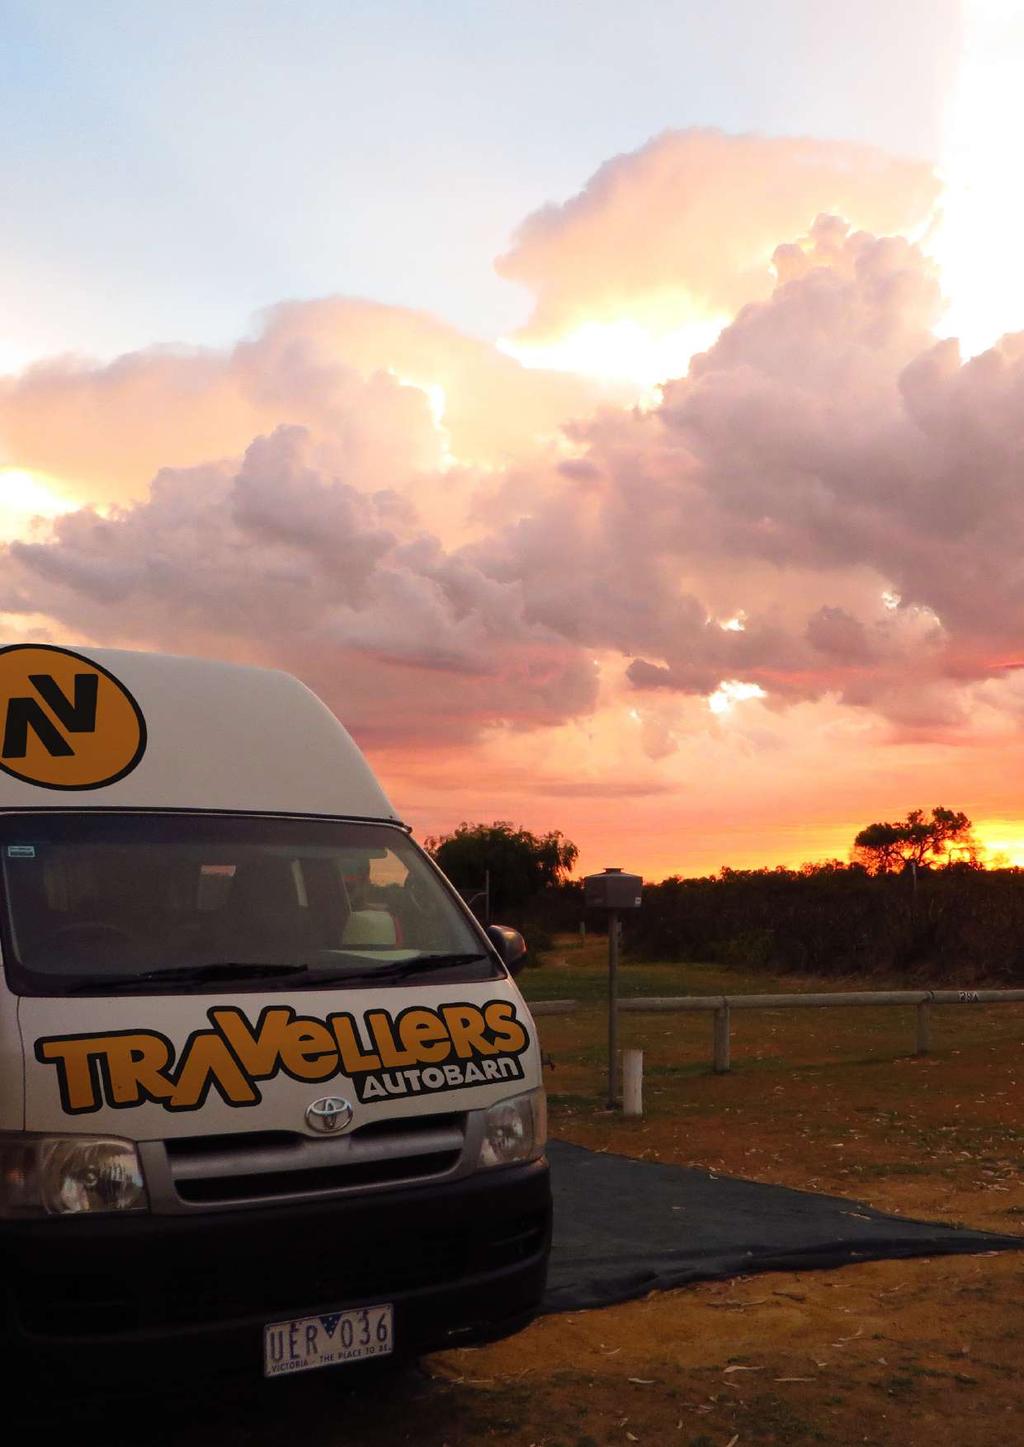 Whether you are a gap year backpacker, budget traveller, or tourist on the cheap, discover campervan hire Australia with Travellers